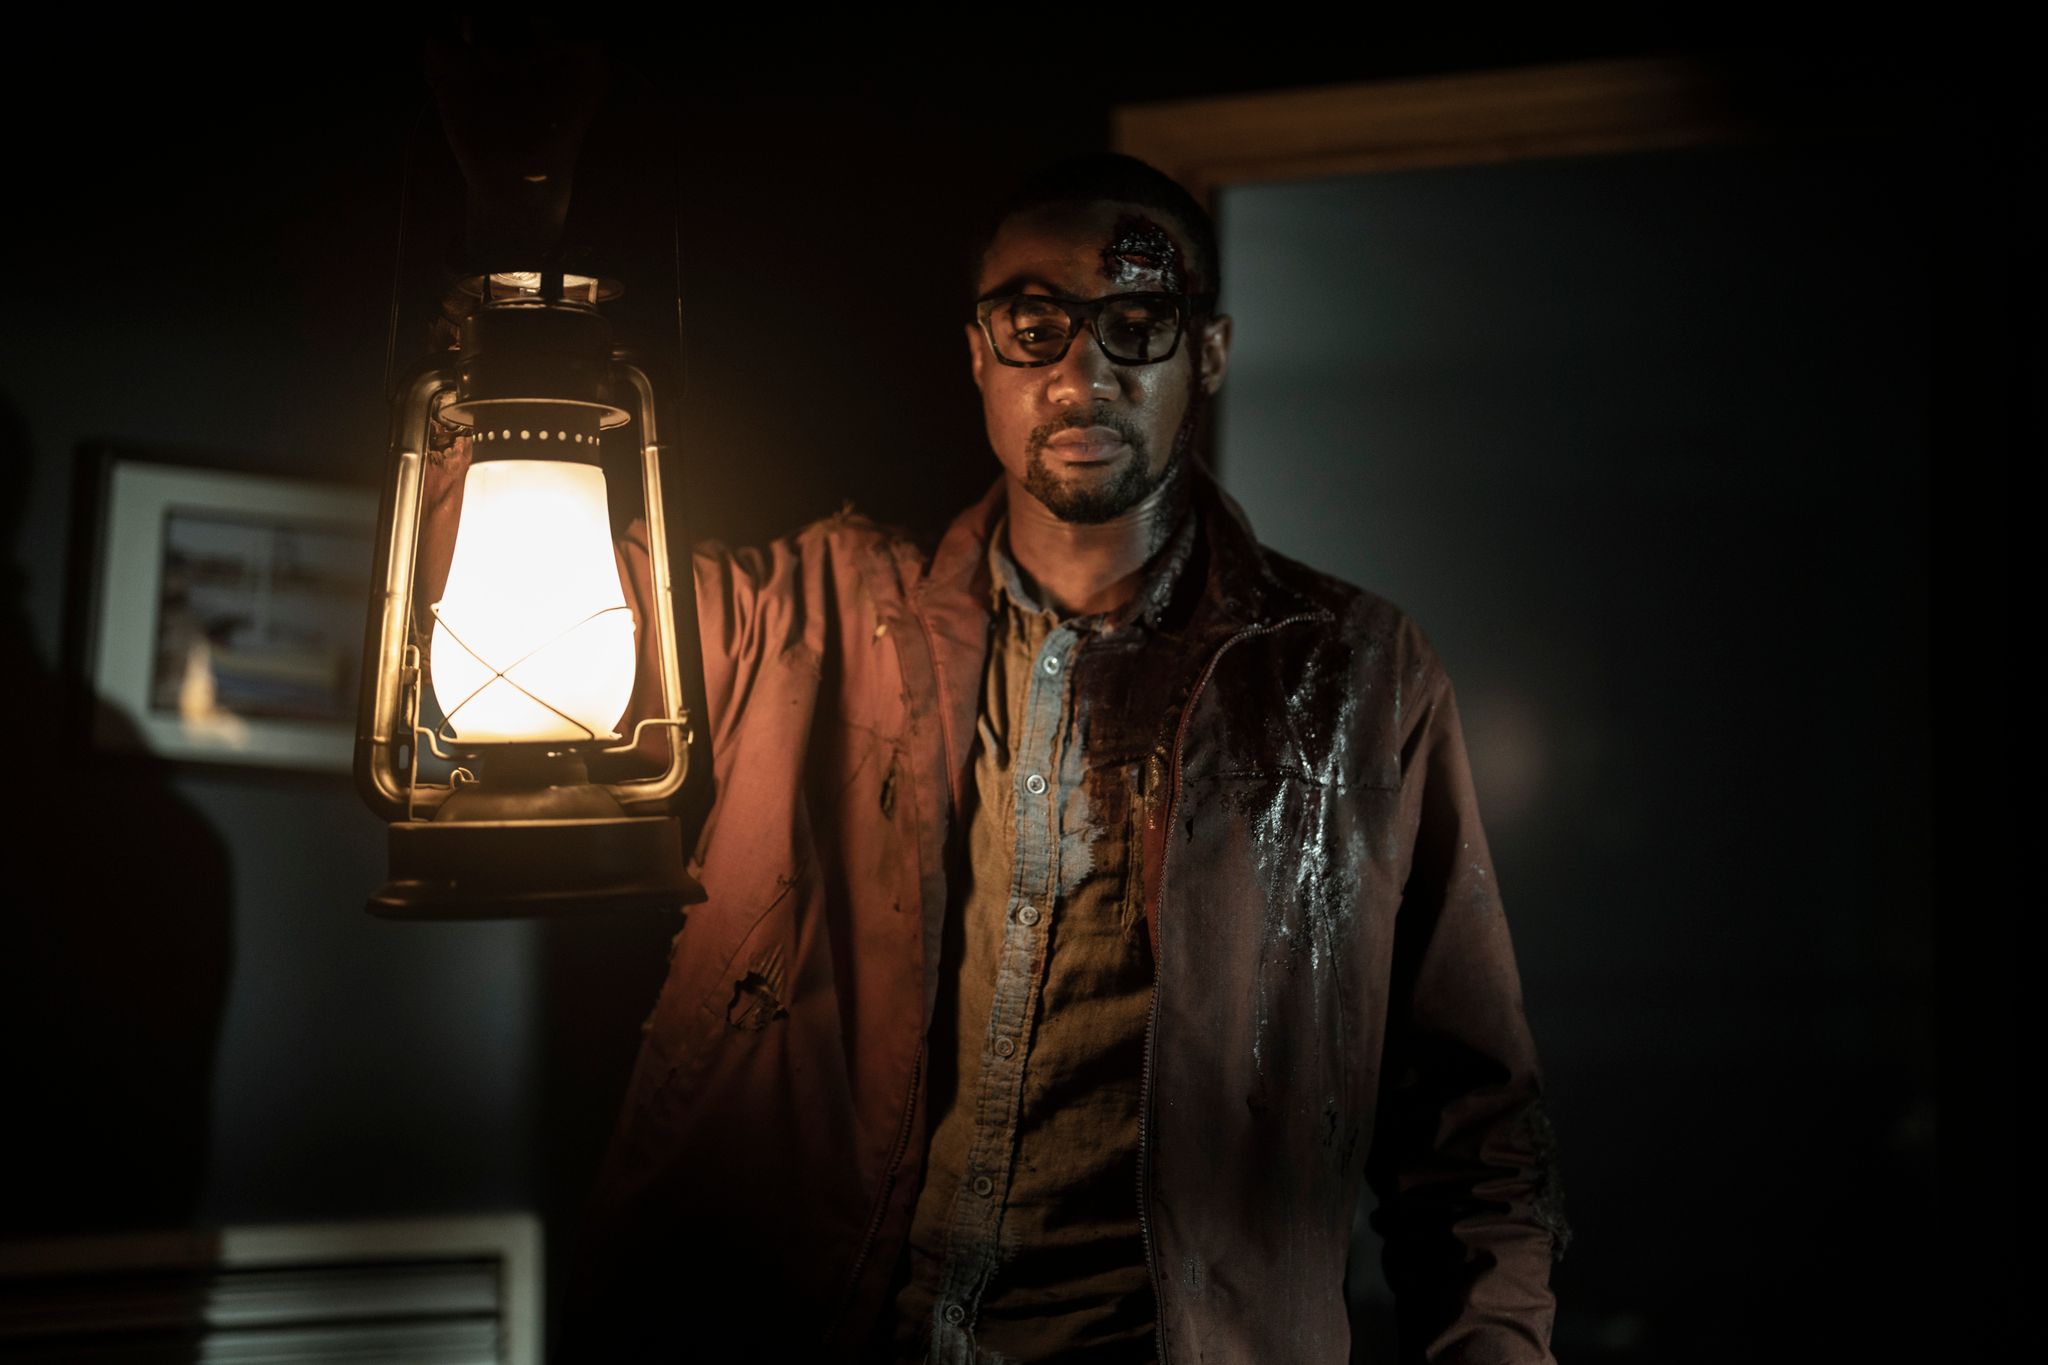 Jessie T. Usher in character as Davon in Tales of the Walking Dead holding up a lantern in a dark room